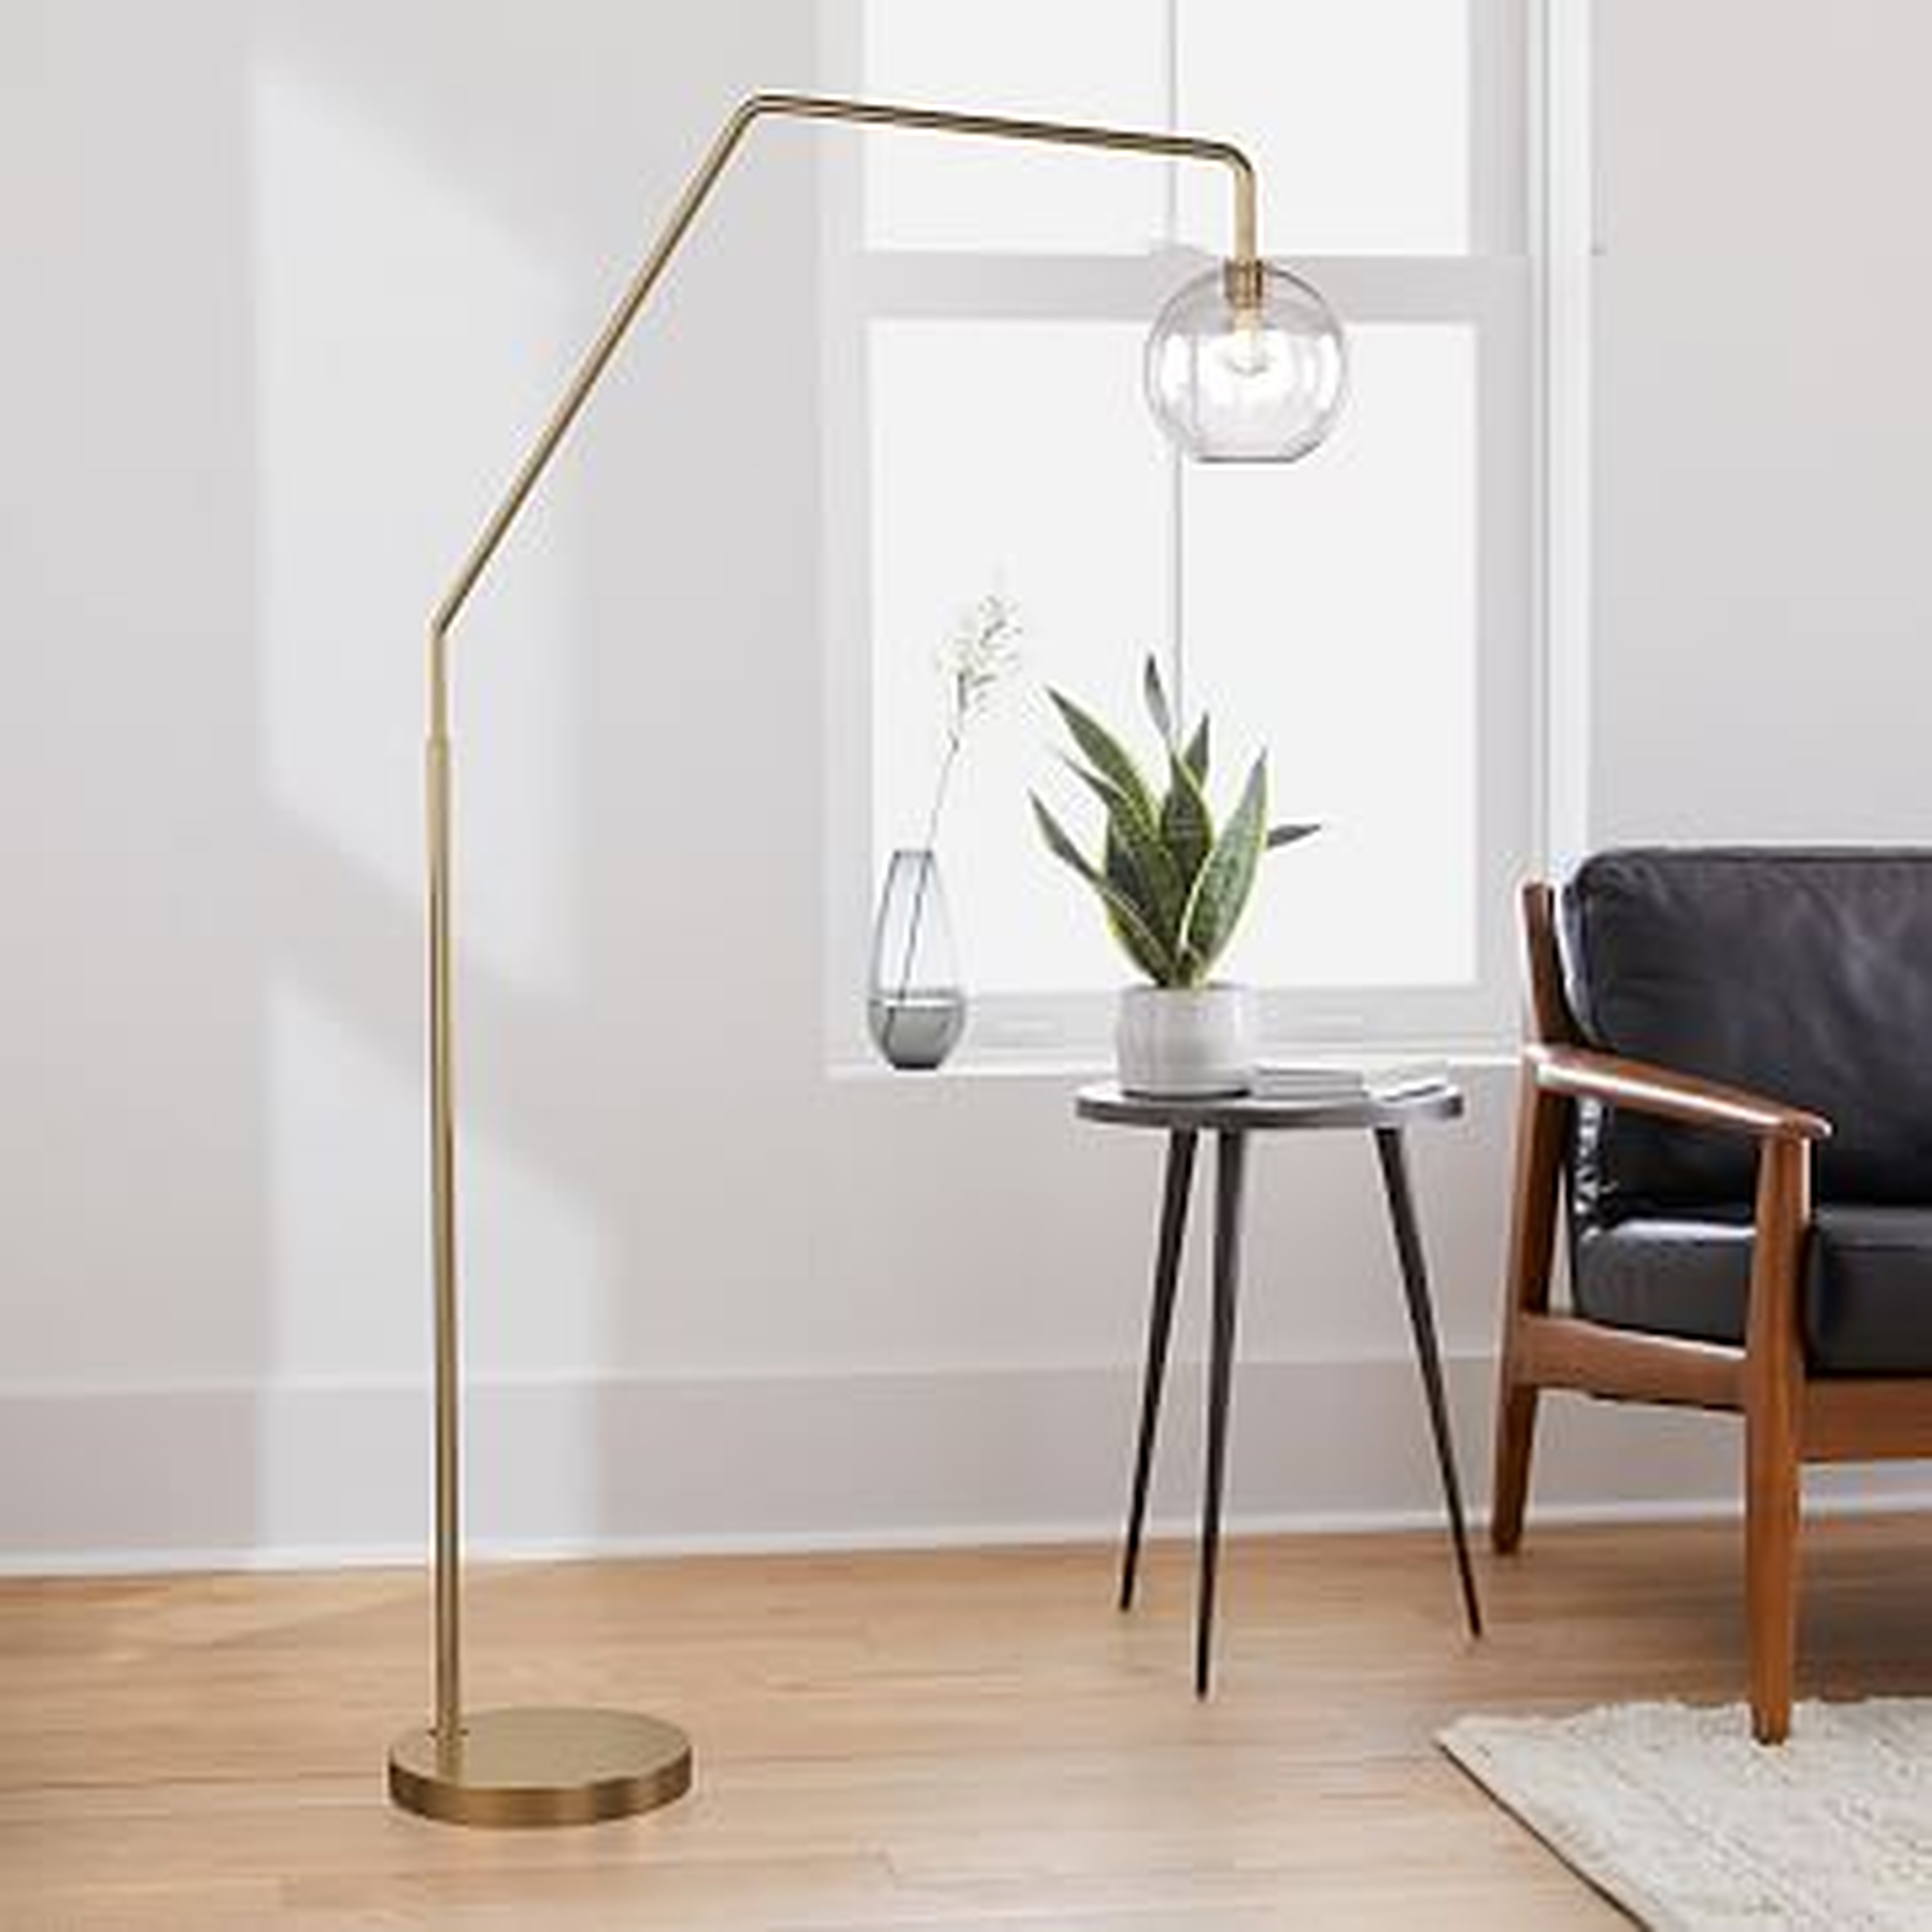 Sculptural Overarching Floor Lamp, Globe Small, Clear, Antique Brass, 8" - West Elm